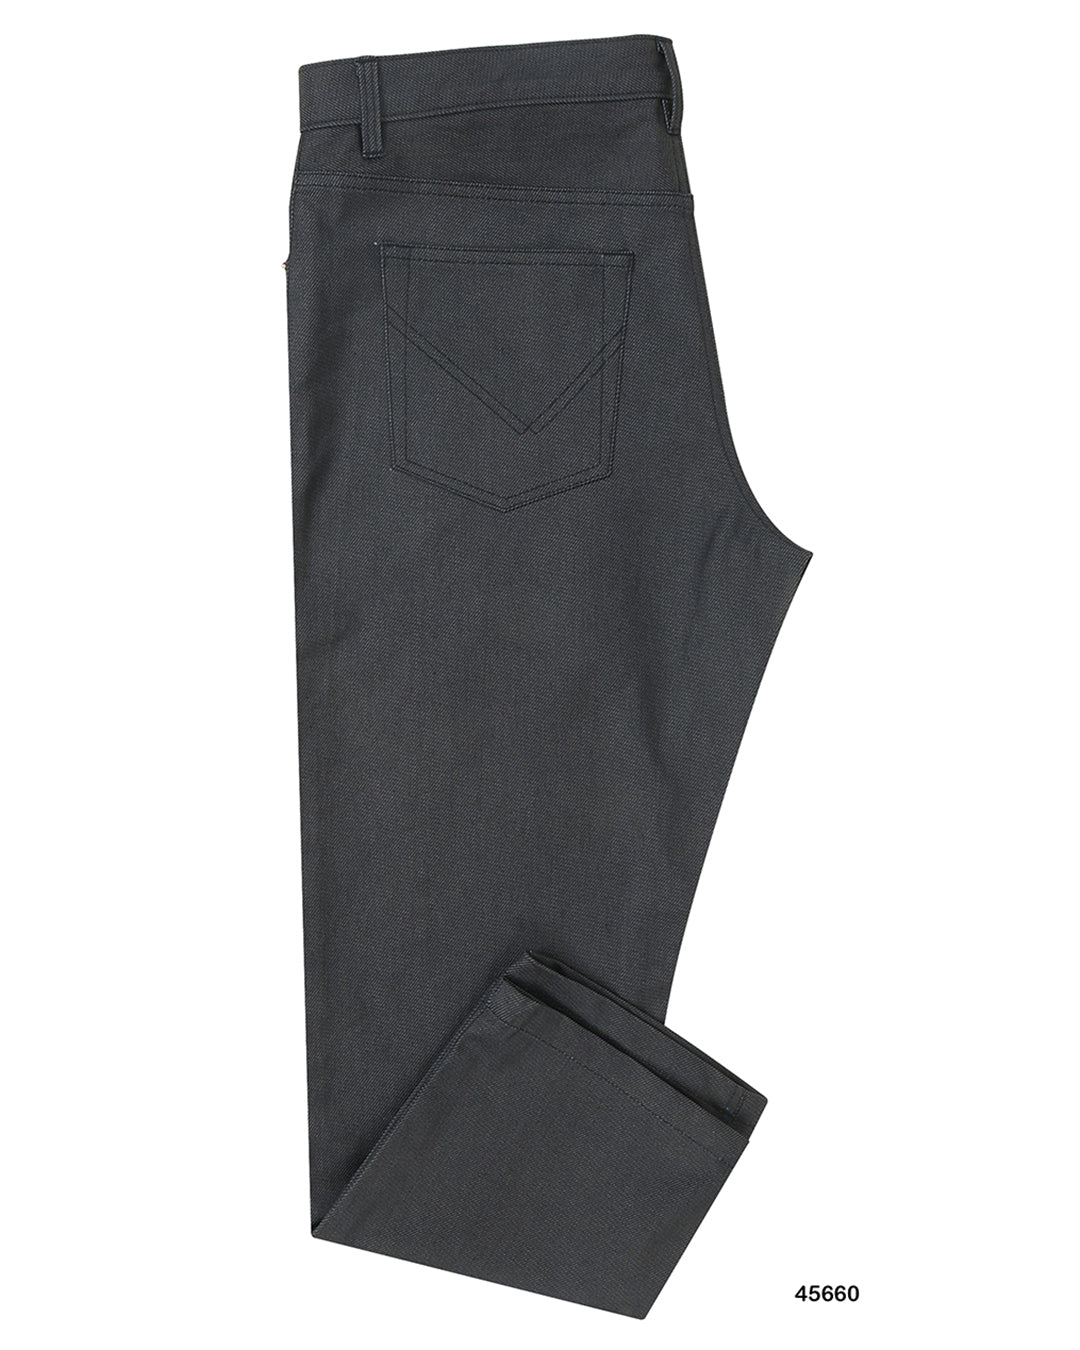 Side view of custom waxed jeans for men by Luxire in charcoal grey